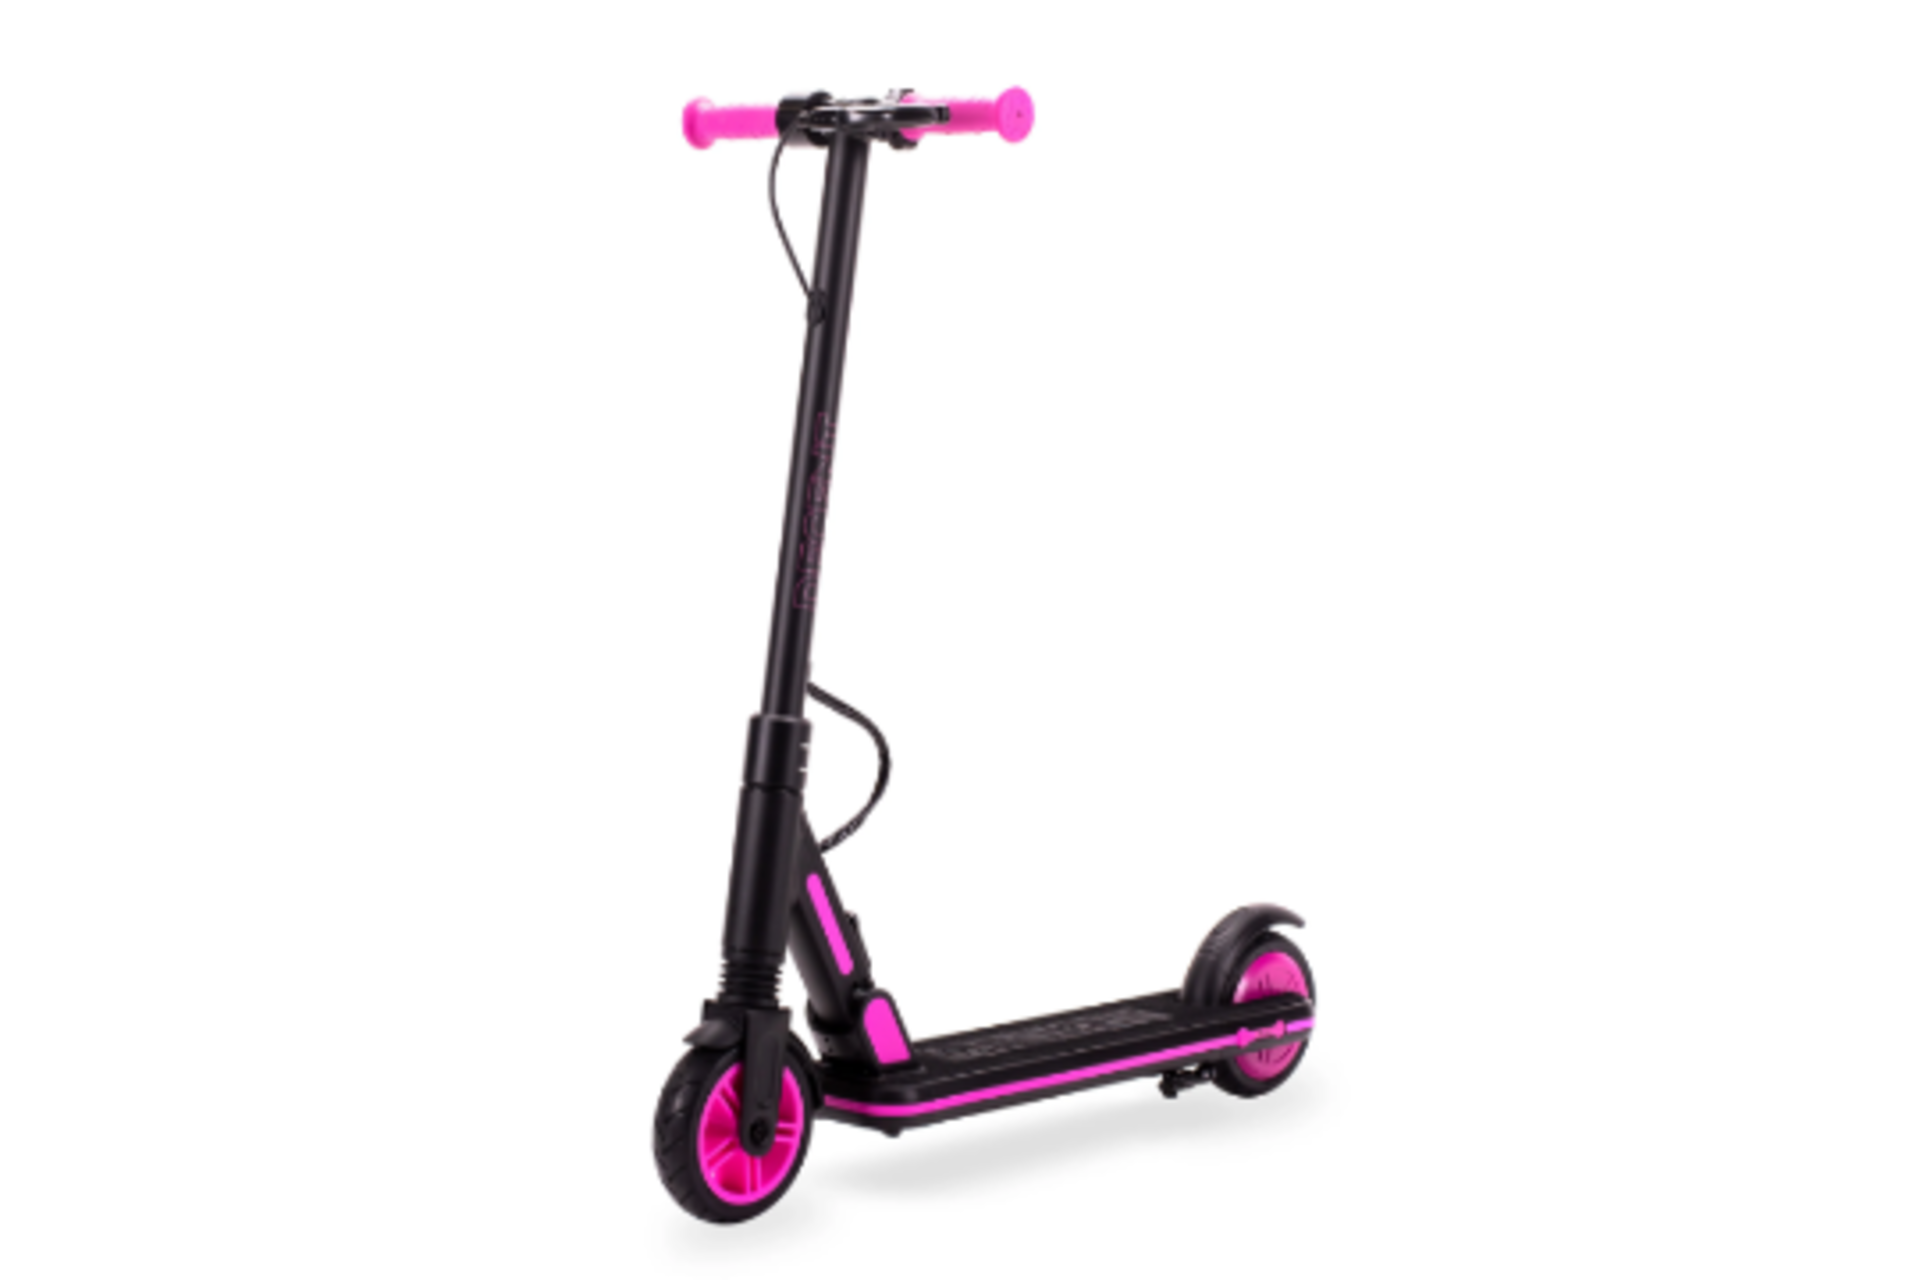 Trade Lot 10 x New &Boxed DECENT Kids Electric Scooter - Black/Pink. Let your kids zip around in